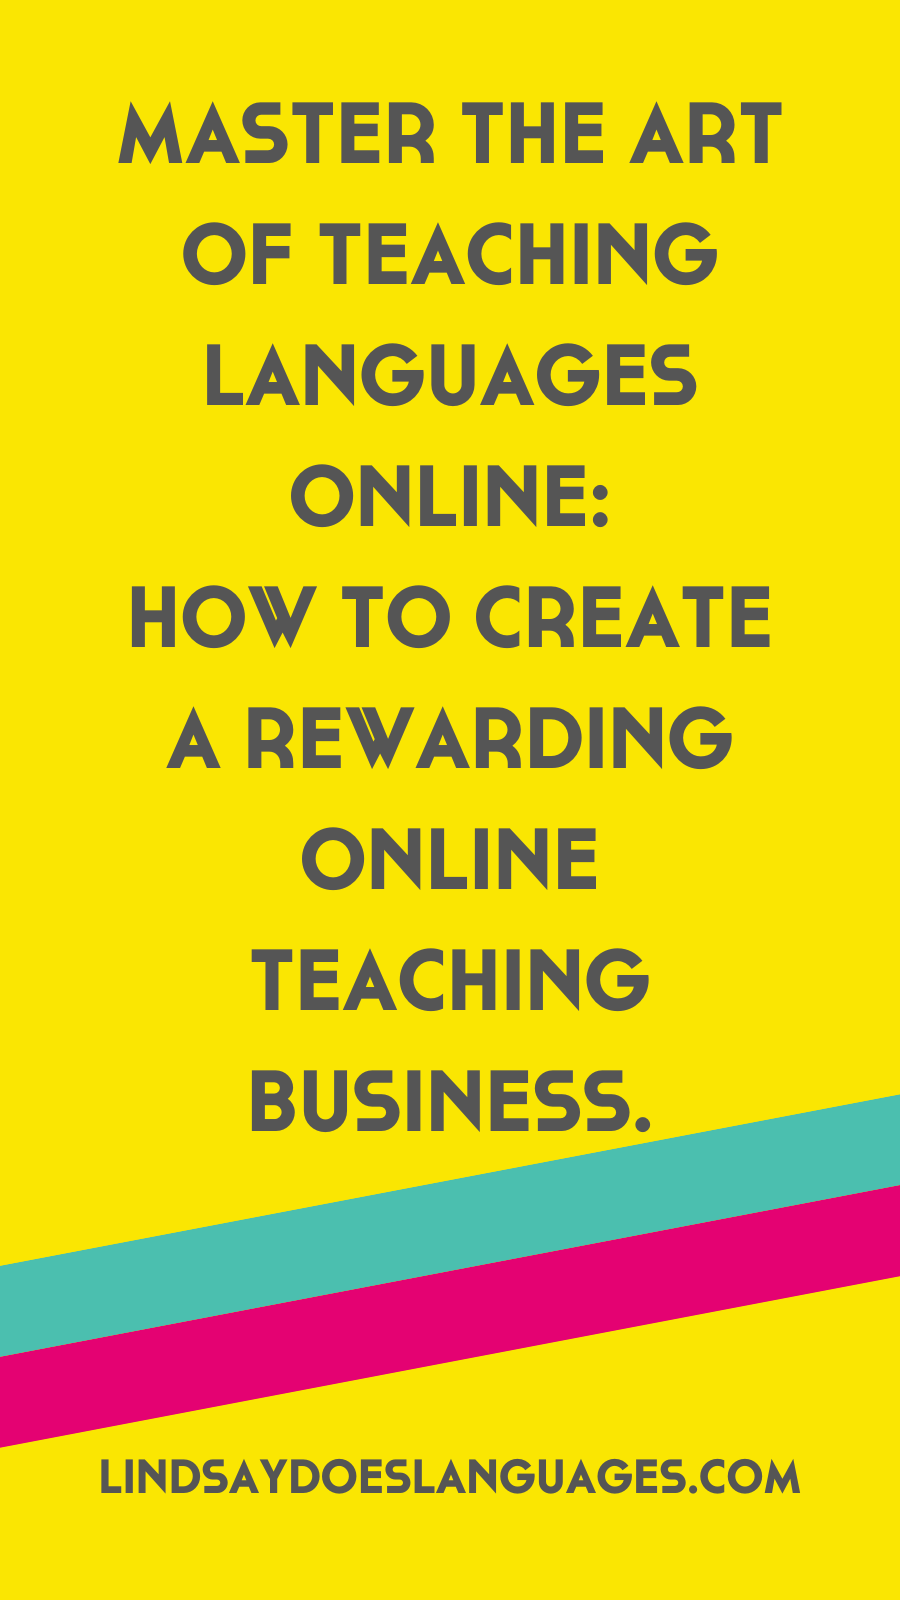 Teaching languages online is rewarding work. In this article, you'll learn how to master the art of teaching languages online.